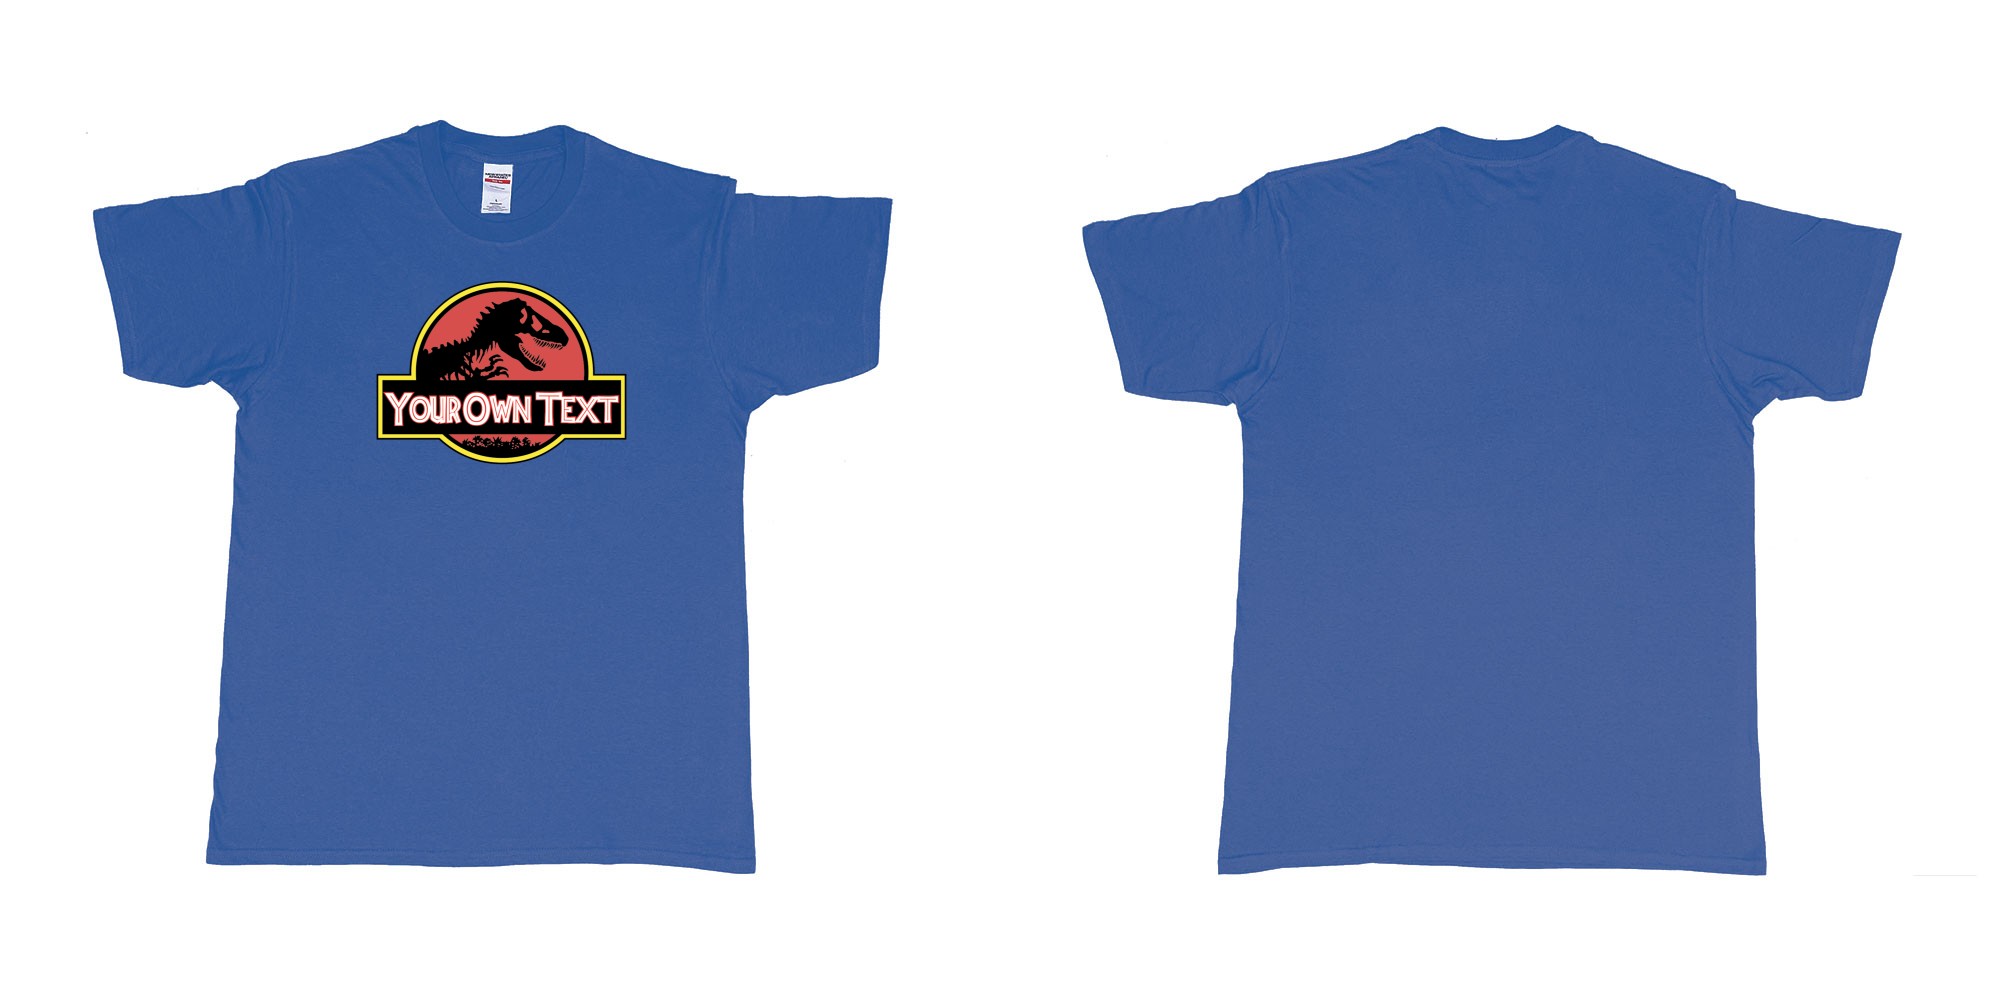 Custom tshirt design Jurassic Park in fabric color royal-blue choice your own text made in Bali by The Pirate Way